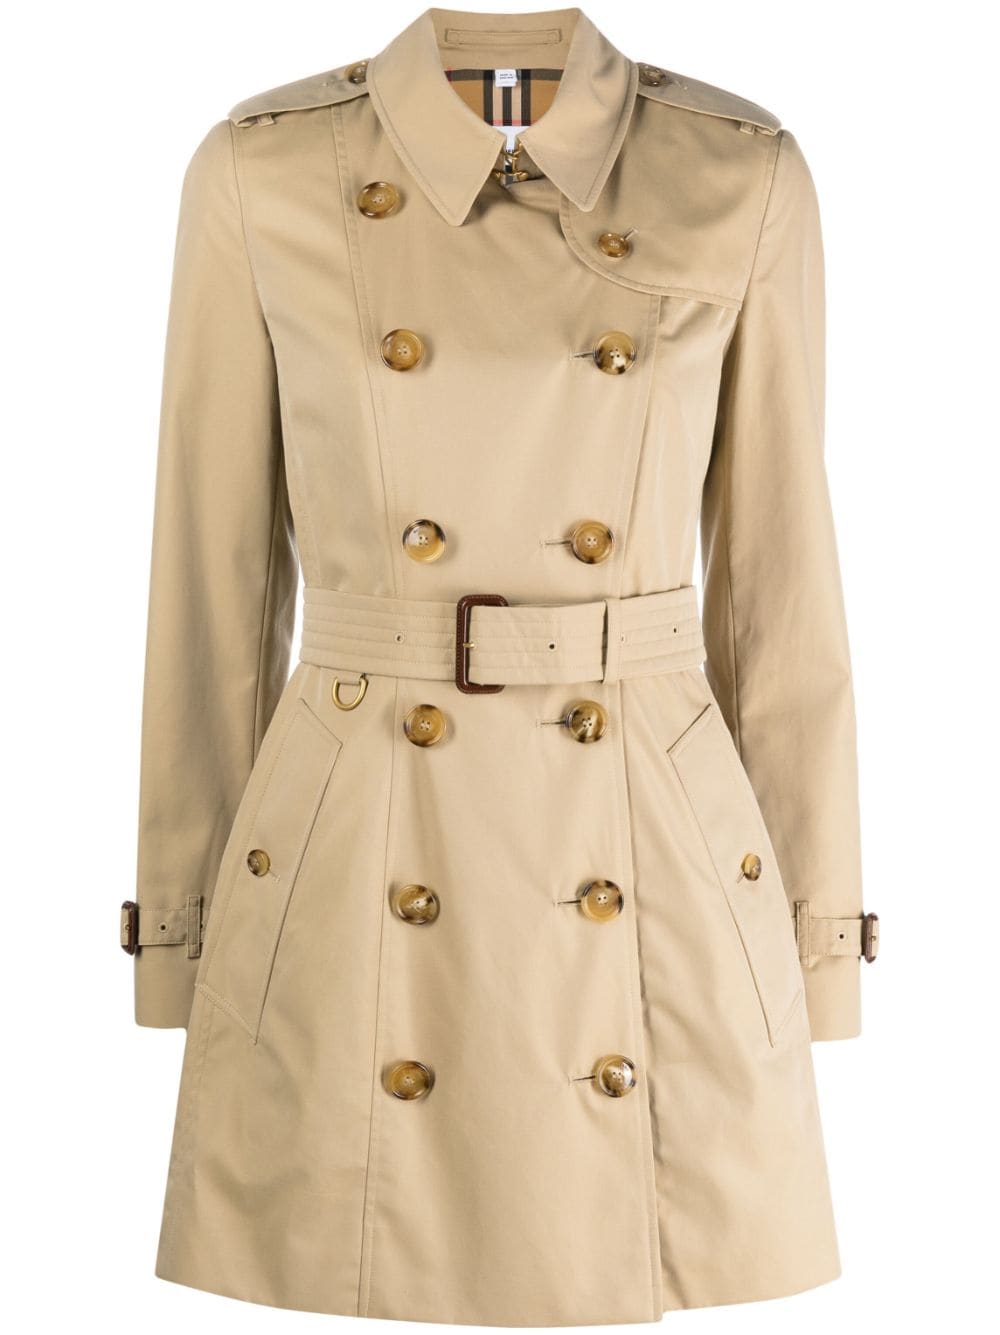 BURBERRY Classy Cotton Trench Jacket for Women in Beige - FW23 Collection